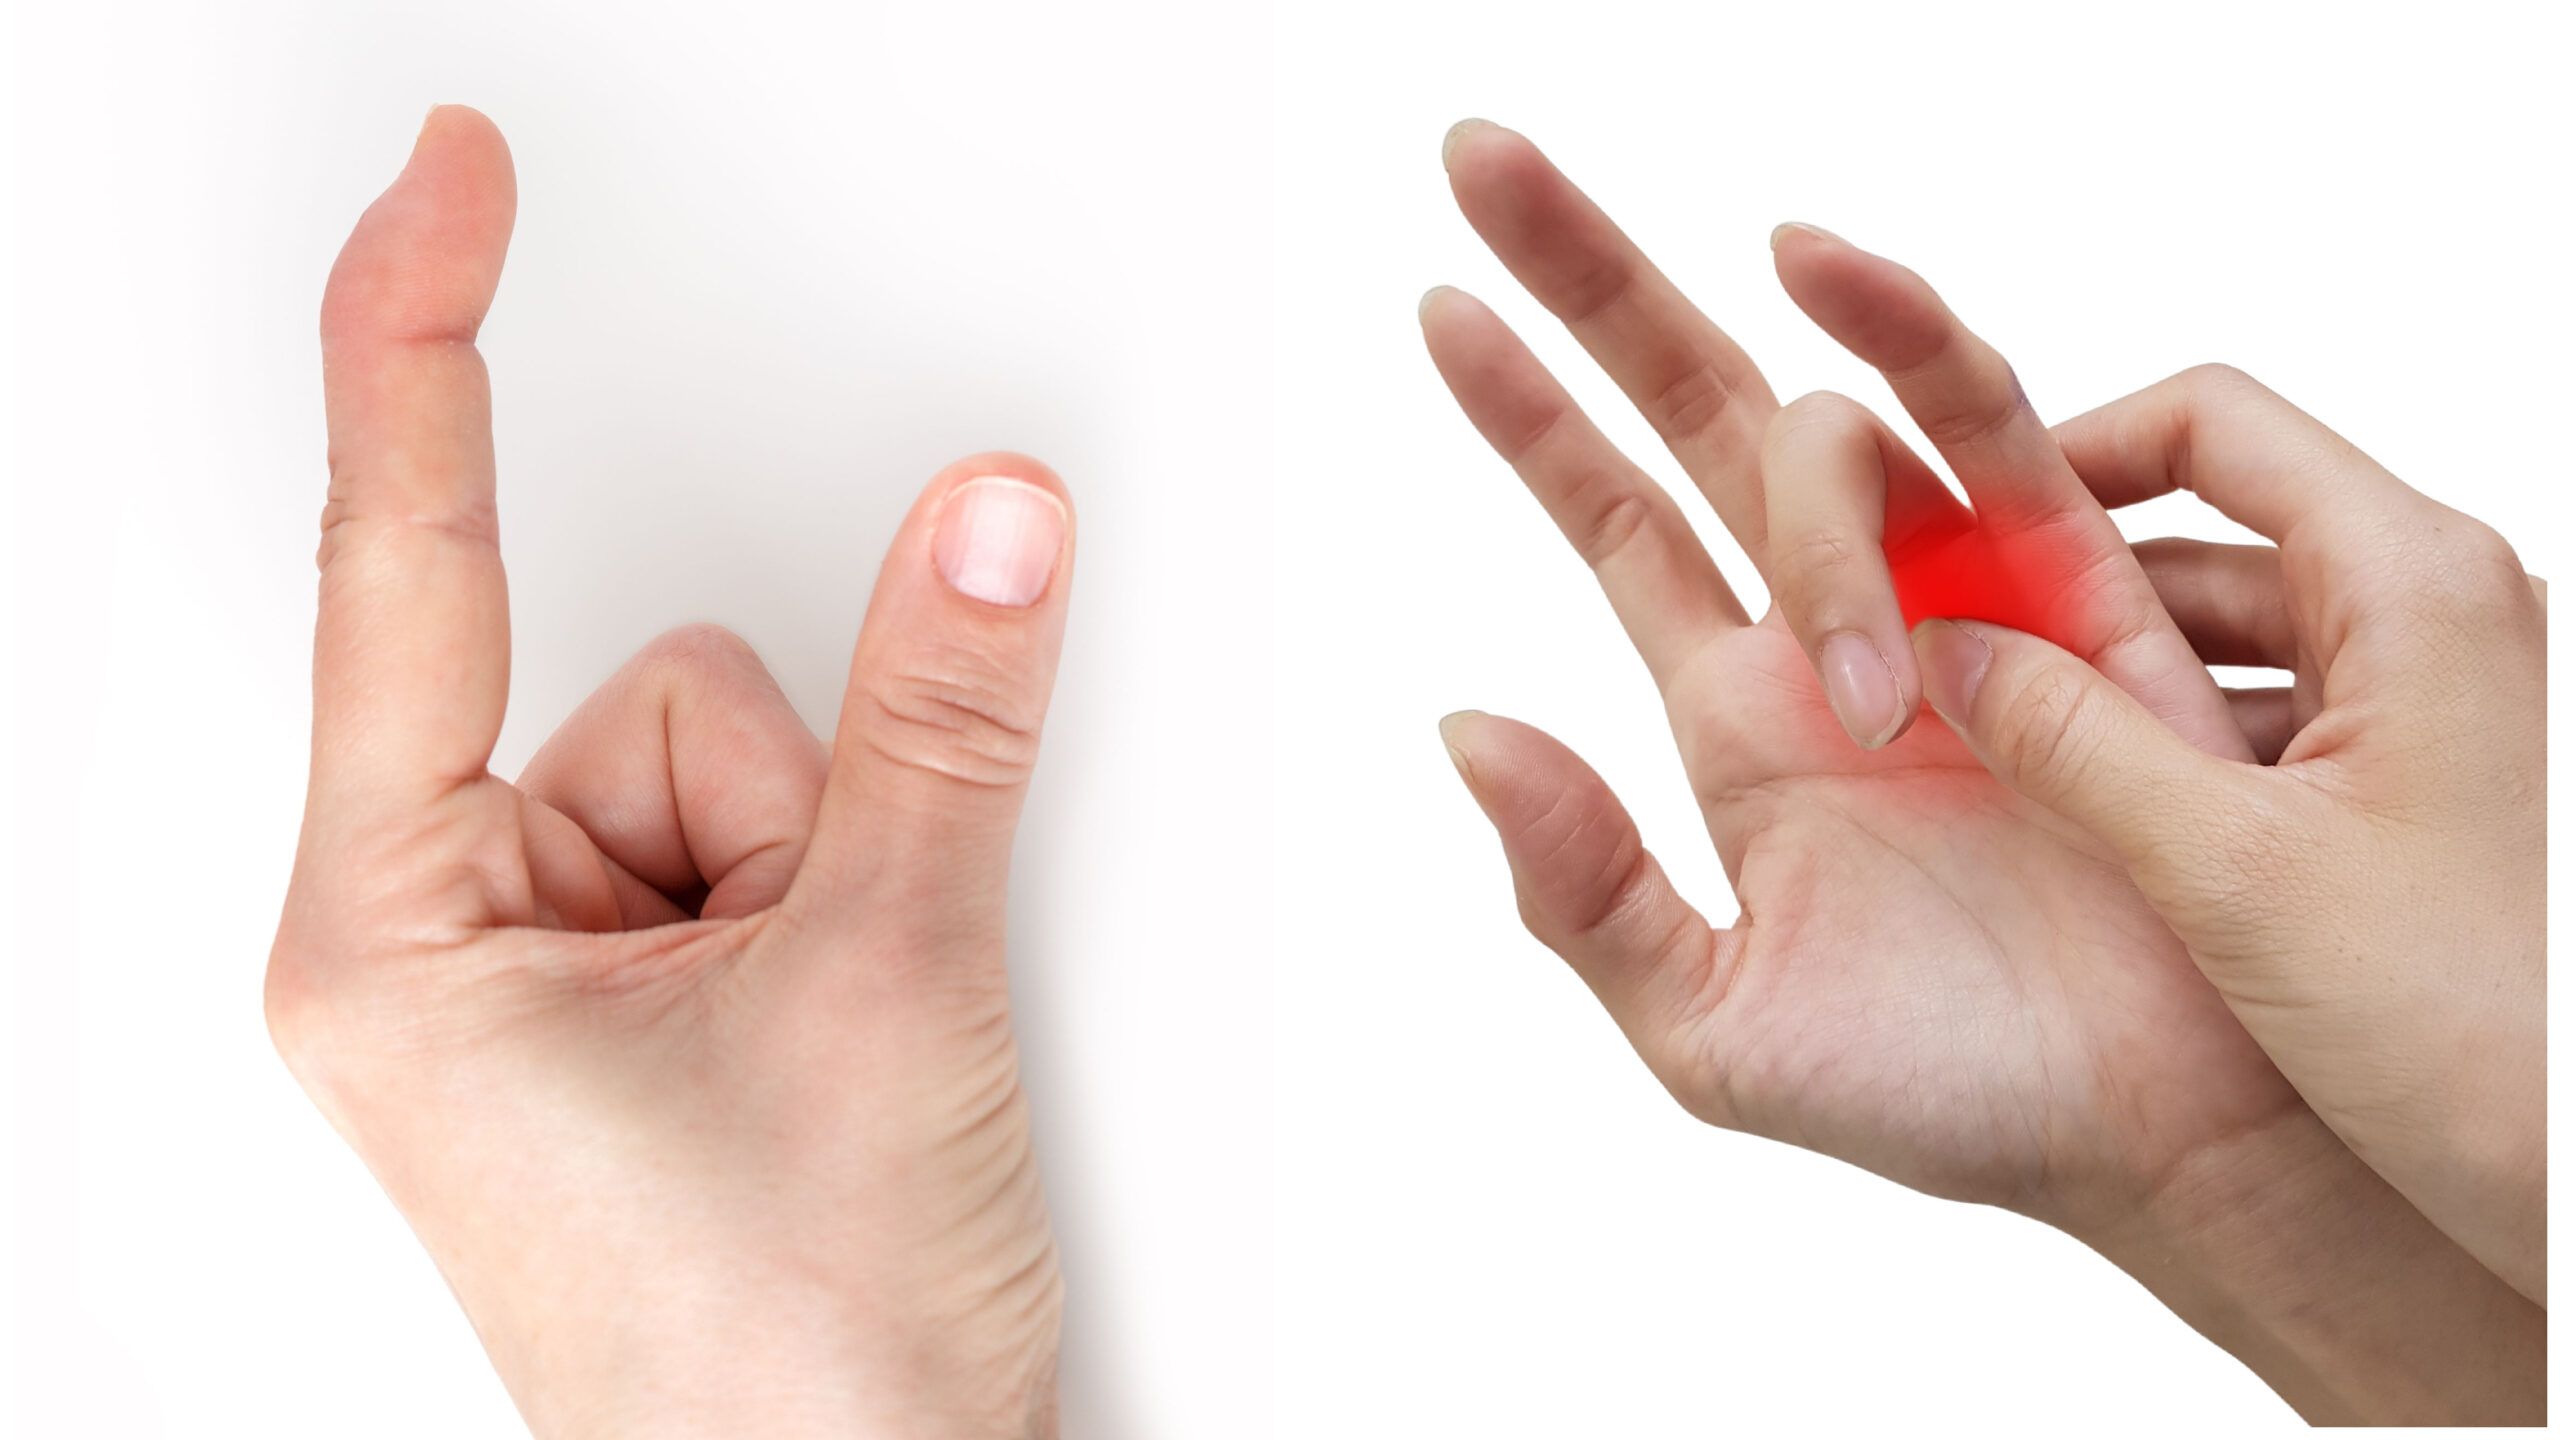 Sticky fingers: what to do about trigger finger and mallet finger